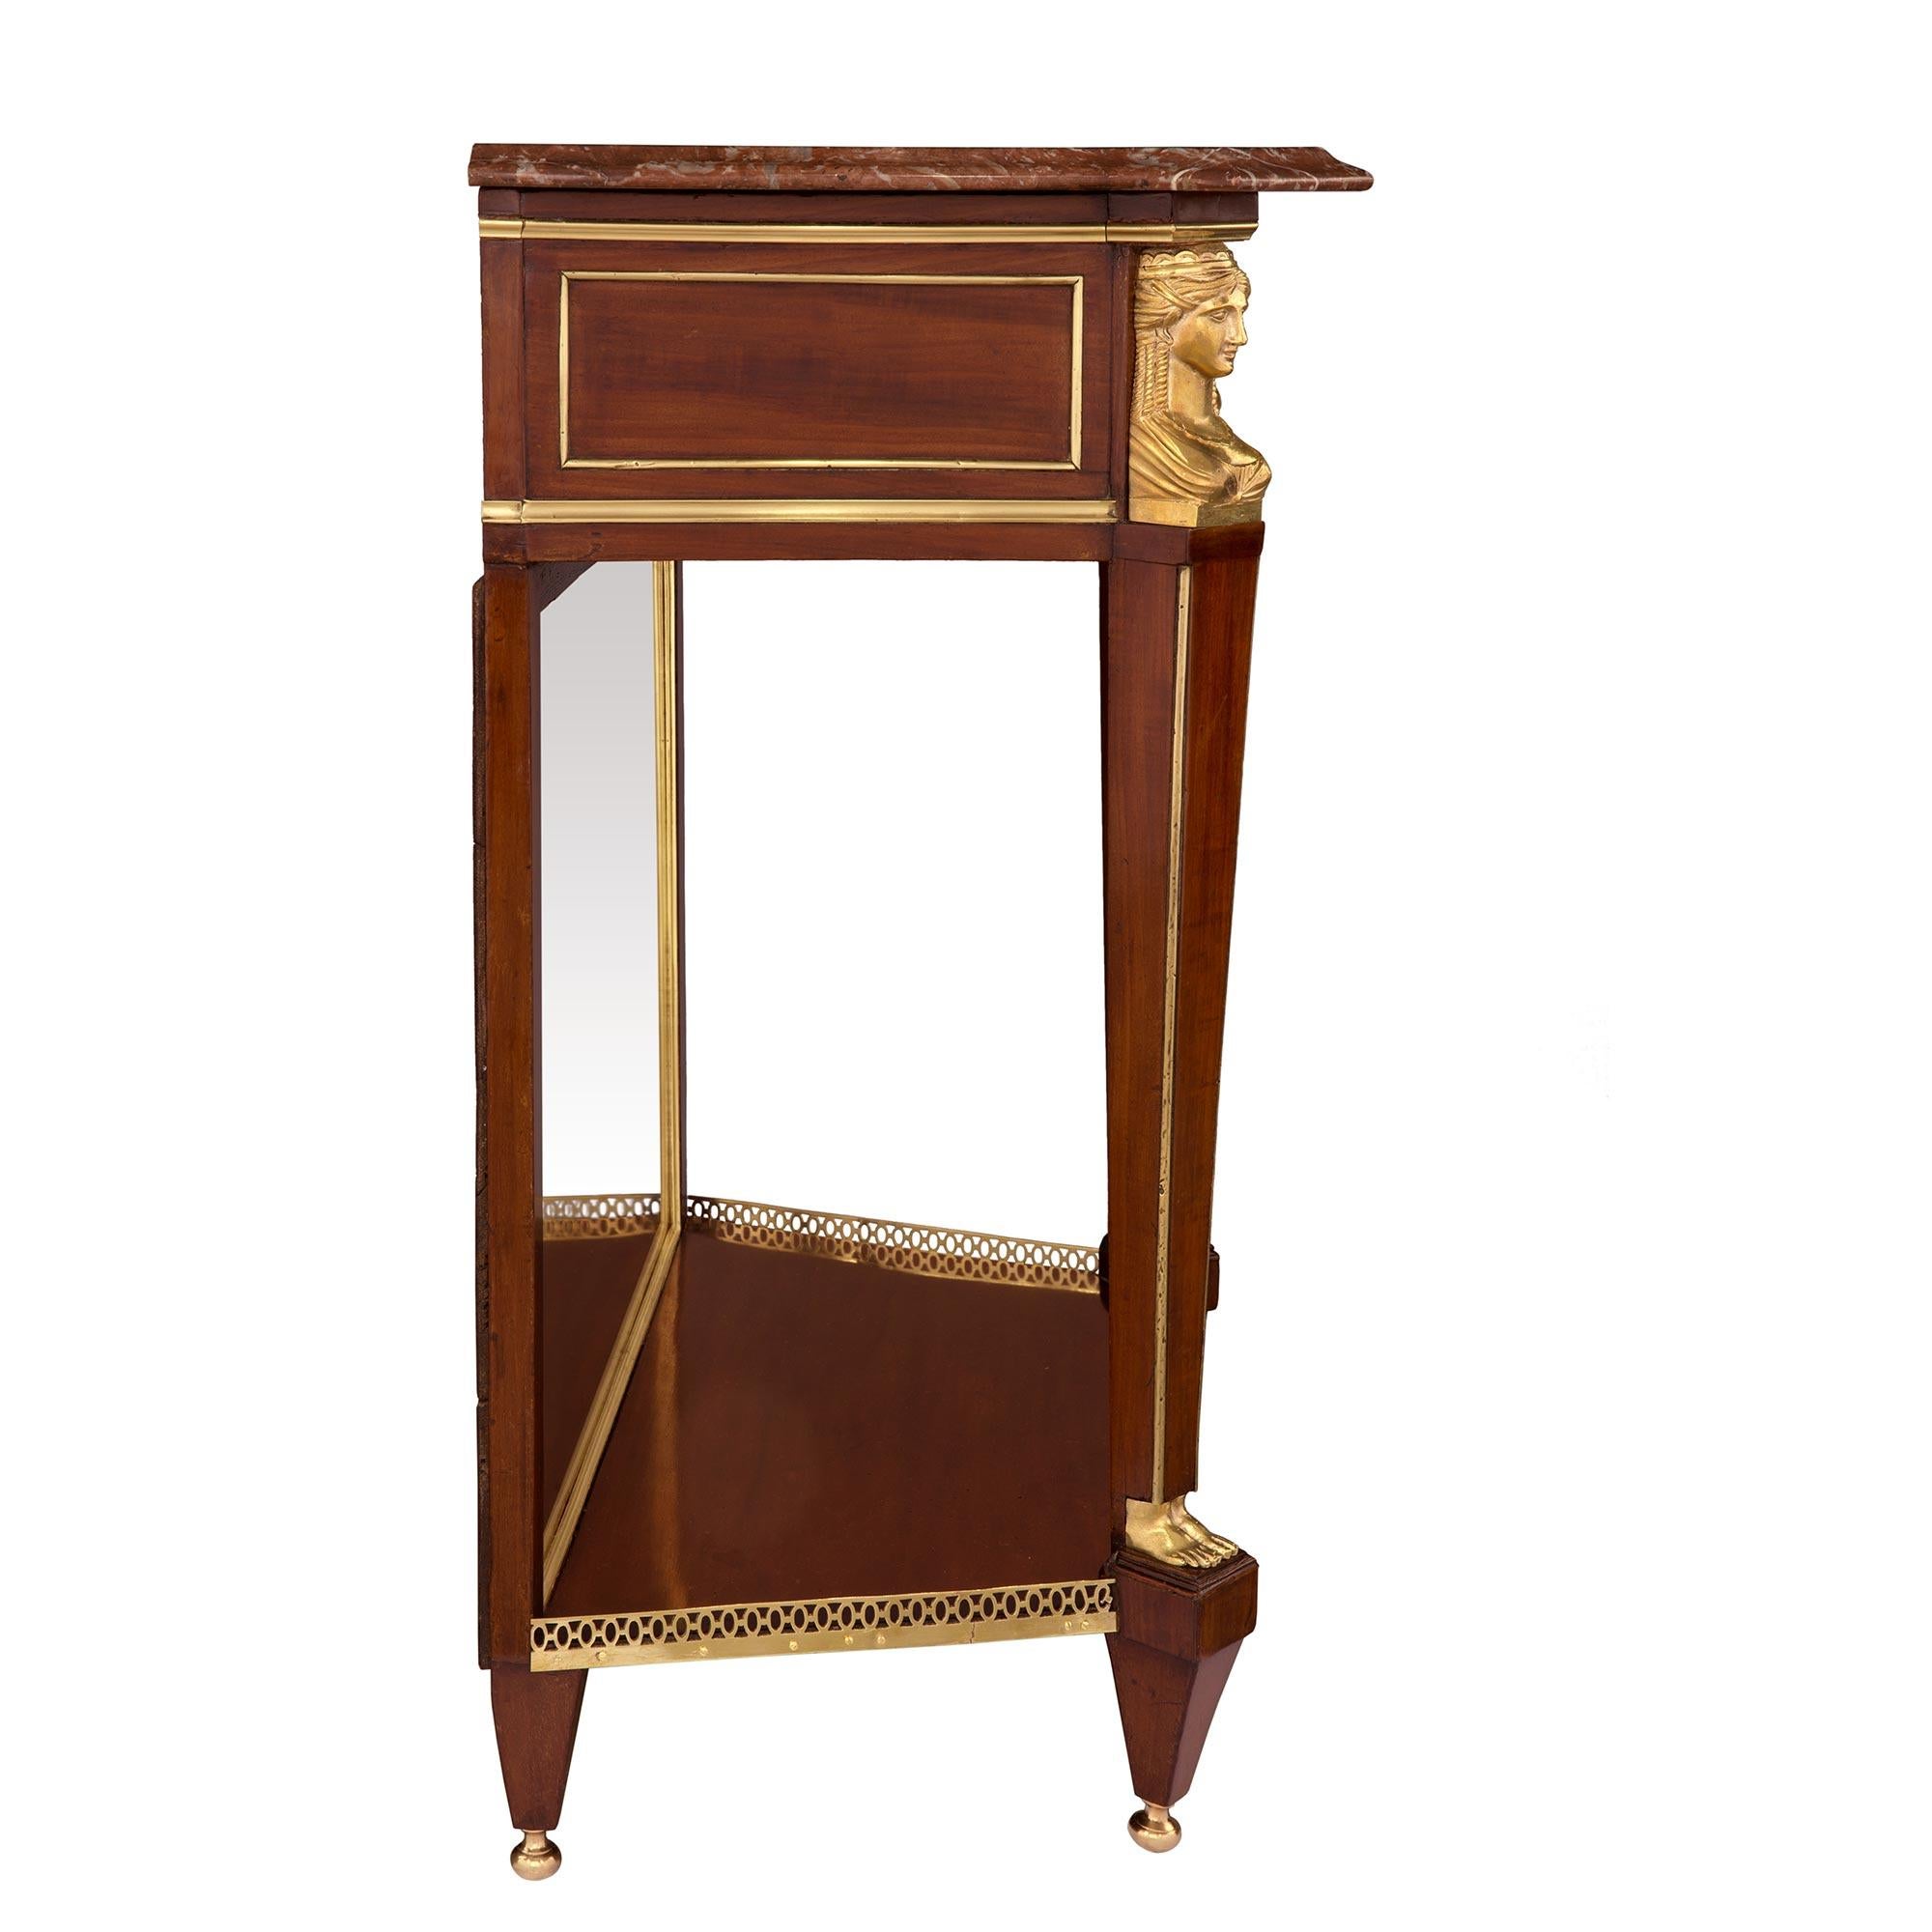 French 19th Century Neoclassical Style Mahogany, Ormolu and Marble Console For Sale 1